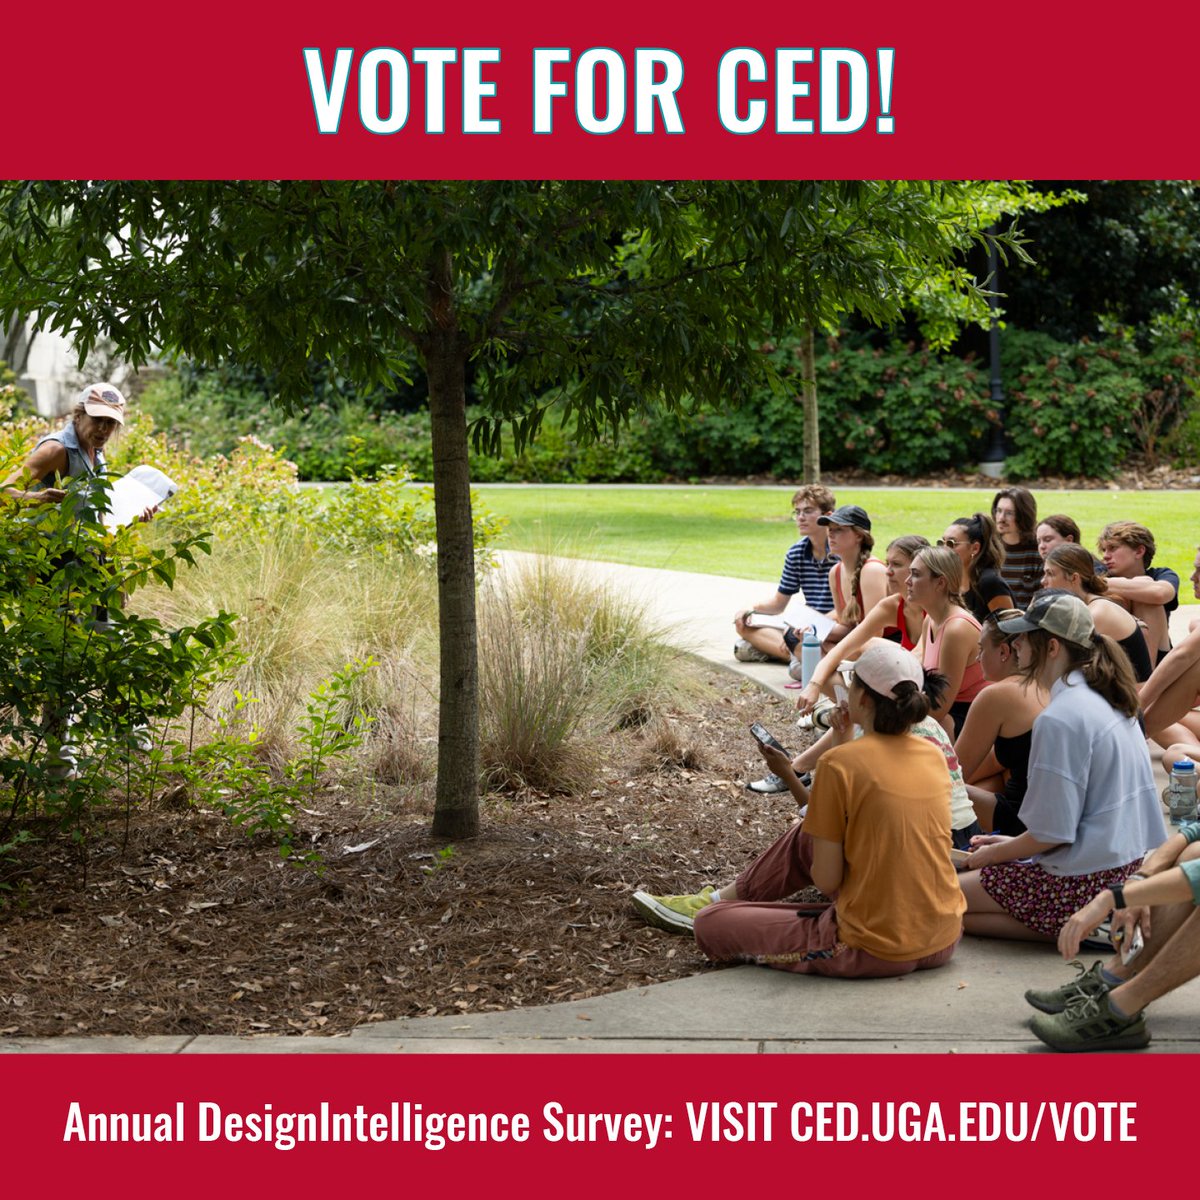 Vote for CED's landscape architecture program in the DesignIntelligence survey! Vote by March 30 to be a part of our commitment to excellence. Let’s design a brighter future together! Visit ced.uga.edu/vote #ugaced #uga #landscapearchitecture #designintelligence #cedvote